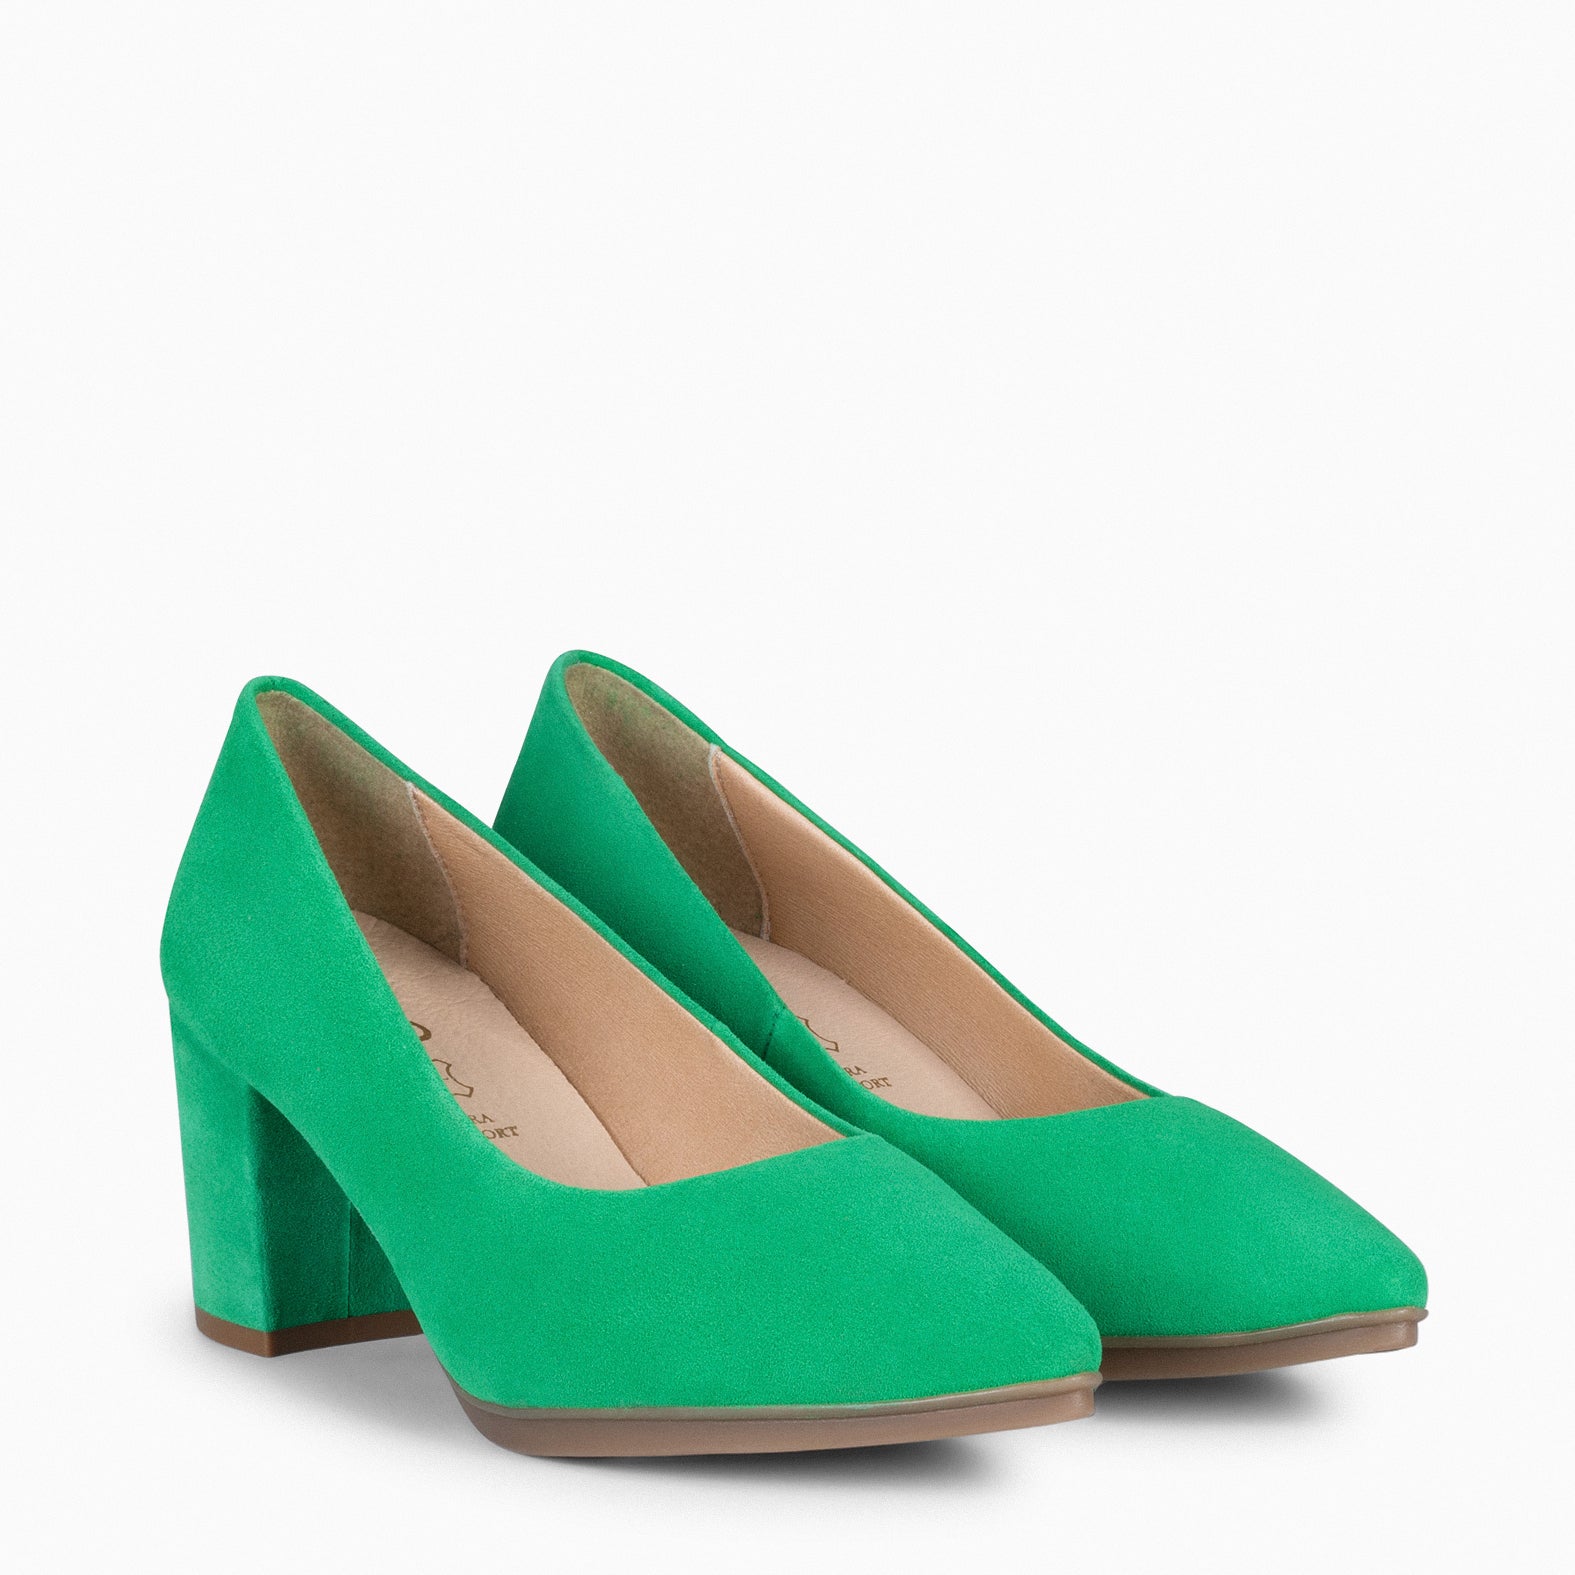 URBAN S – GREEN Suede Mid-Heeled Shoes 